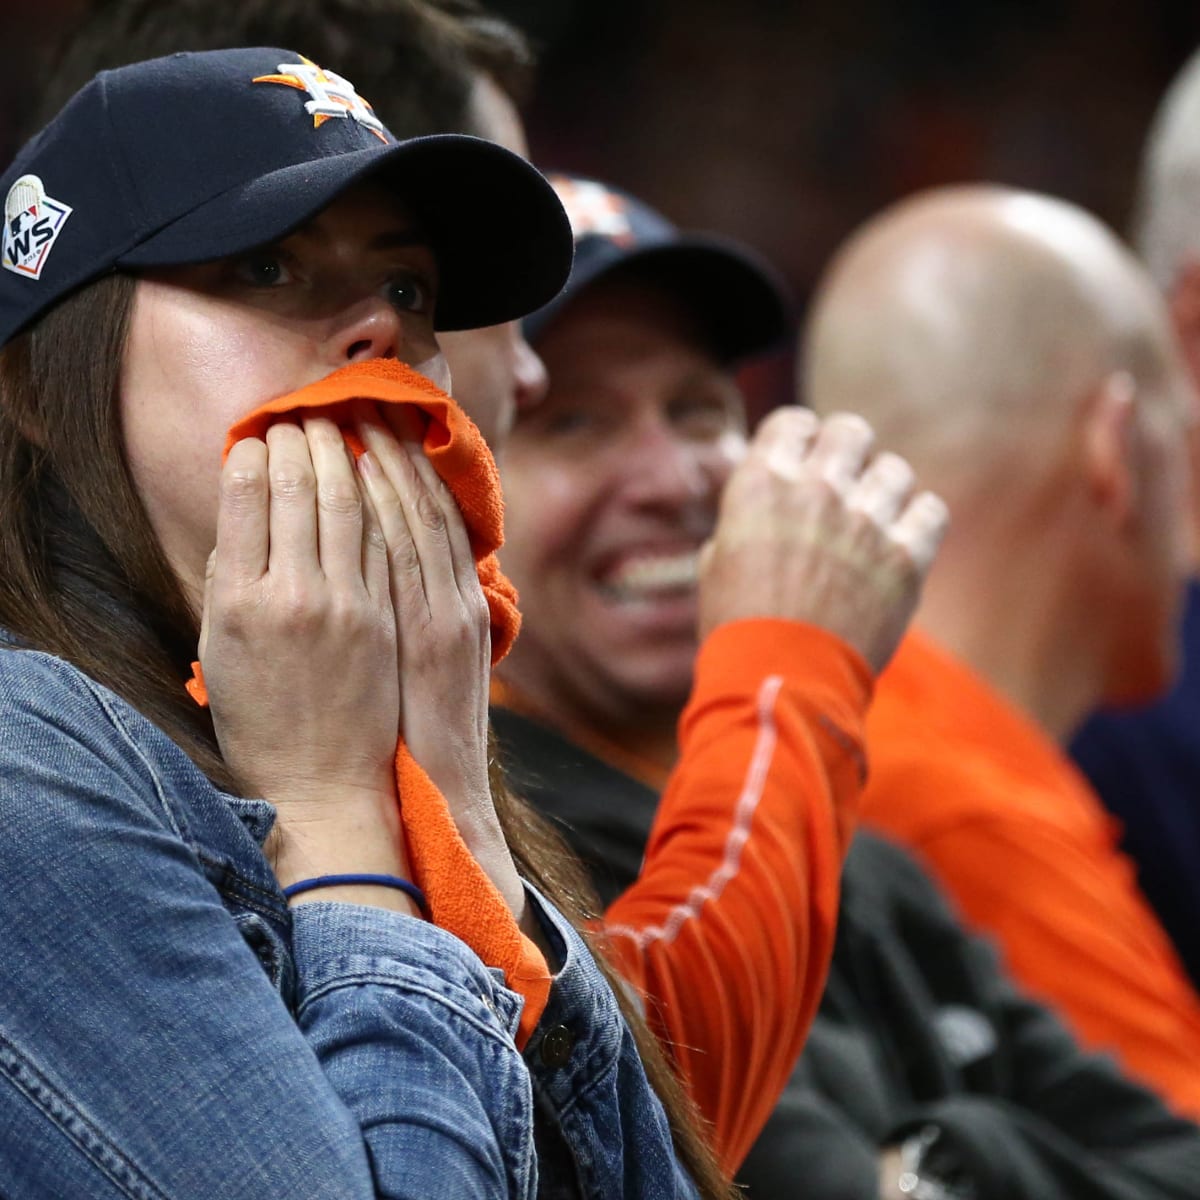 Los Angeles Angels fans toss trash cans, jeer Houston Astros in